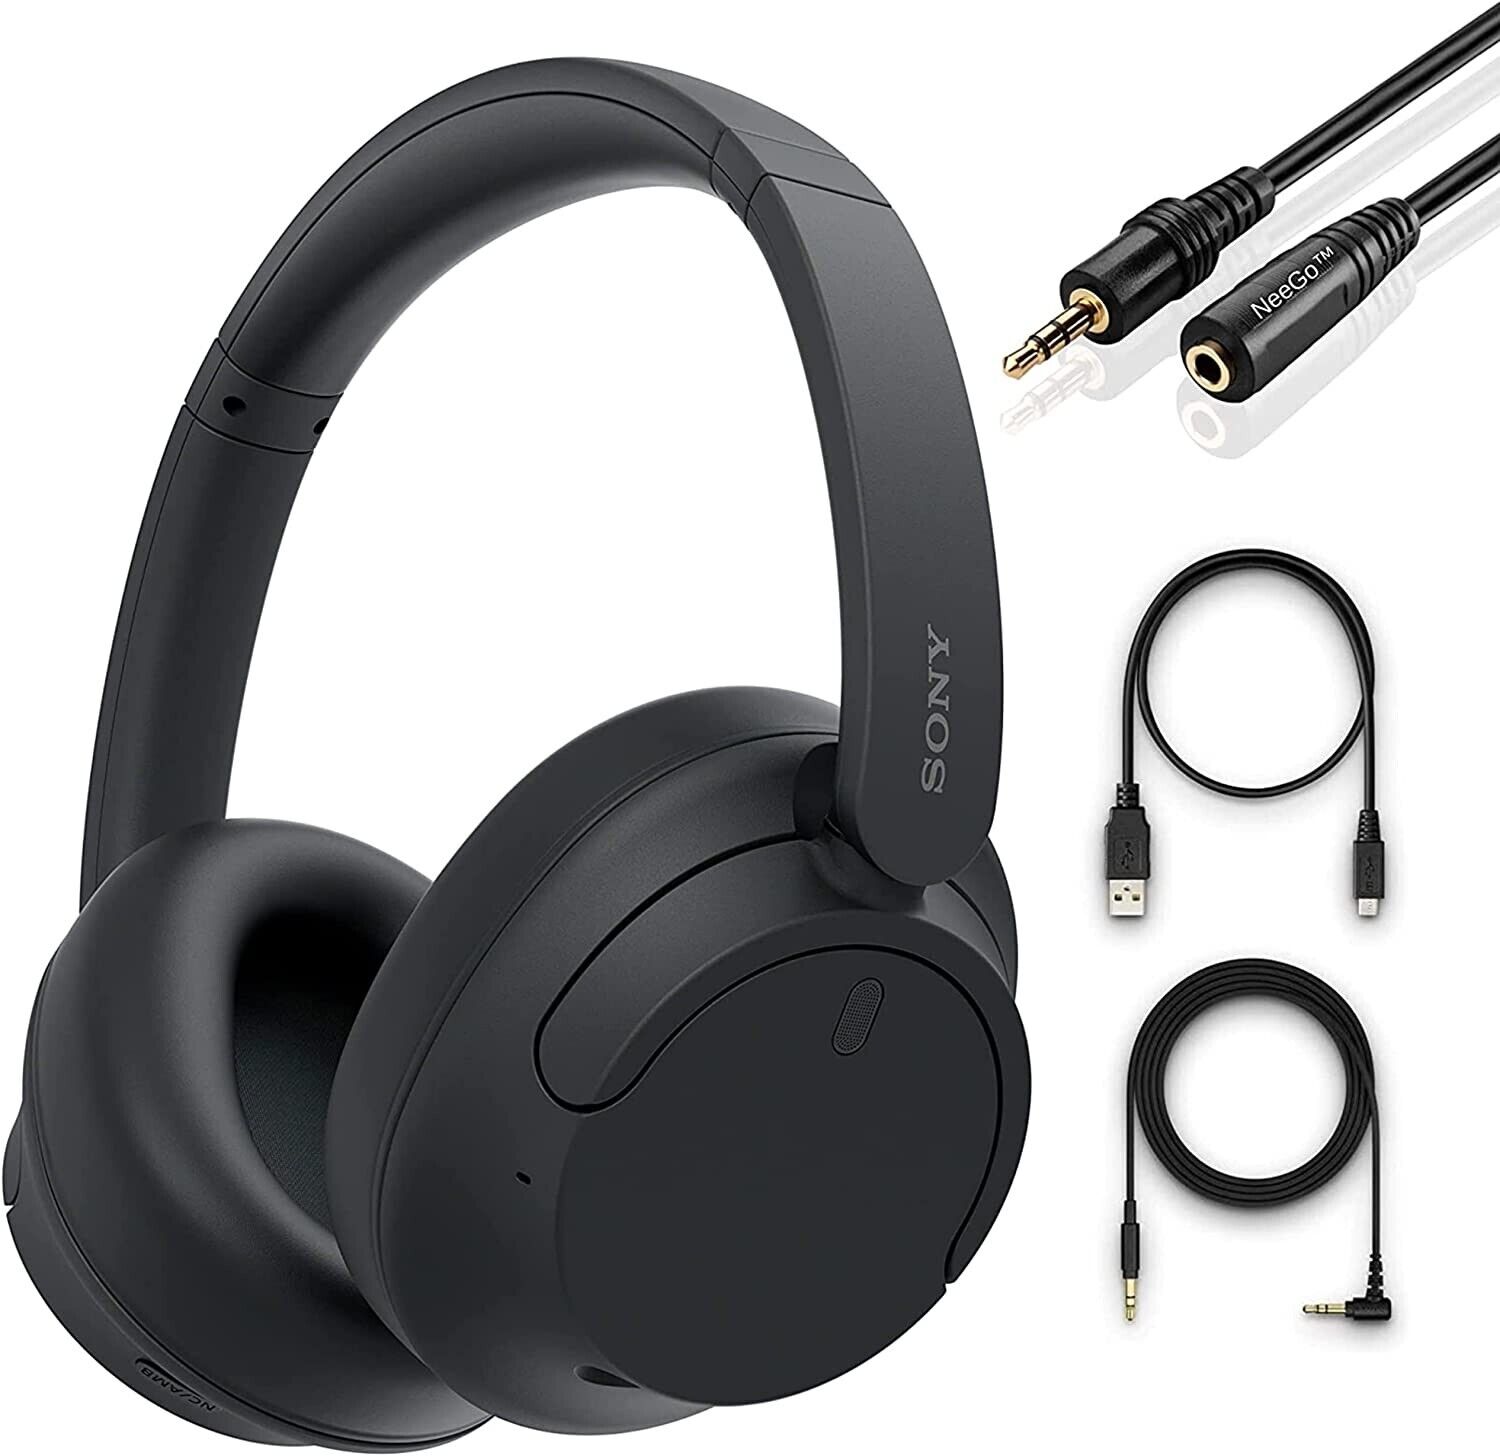 Sony Wireless Noise Cancelling Headphones with Mic & Cable